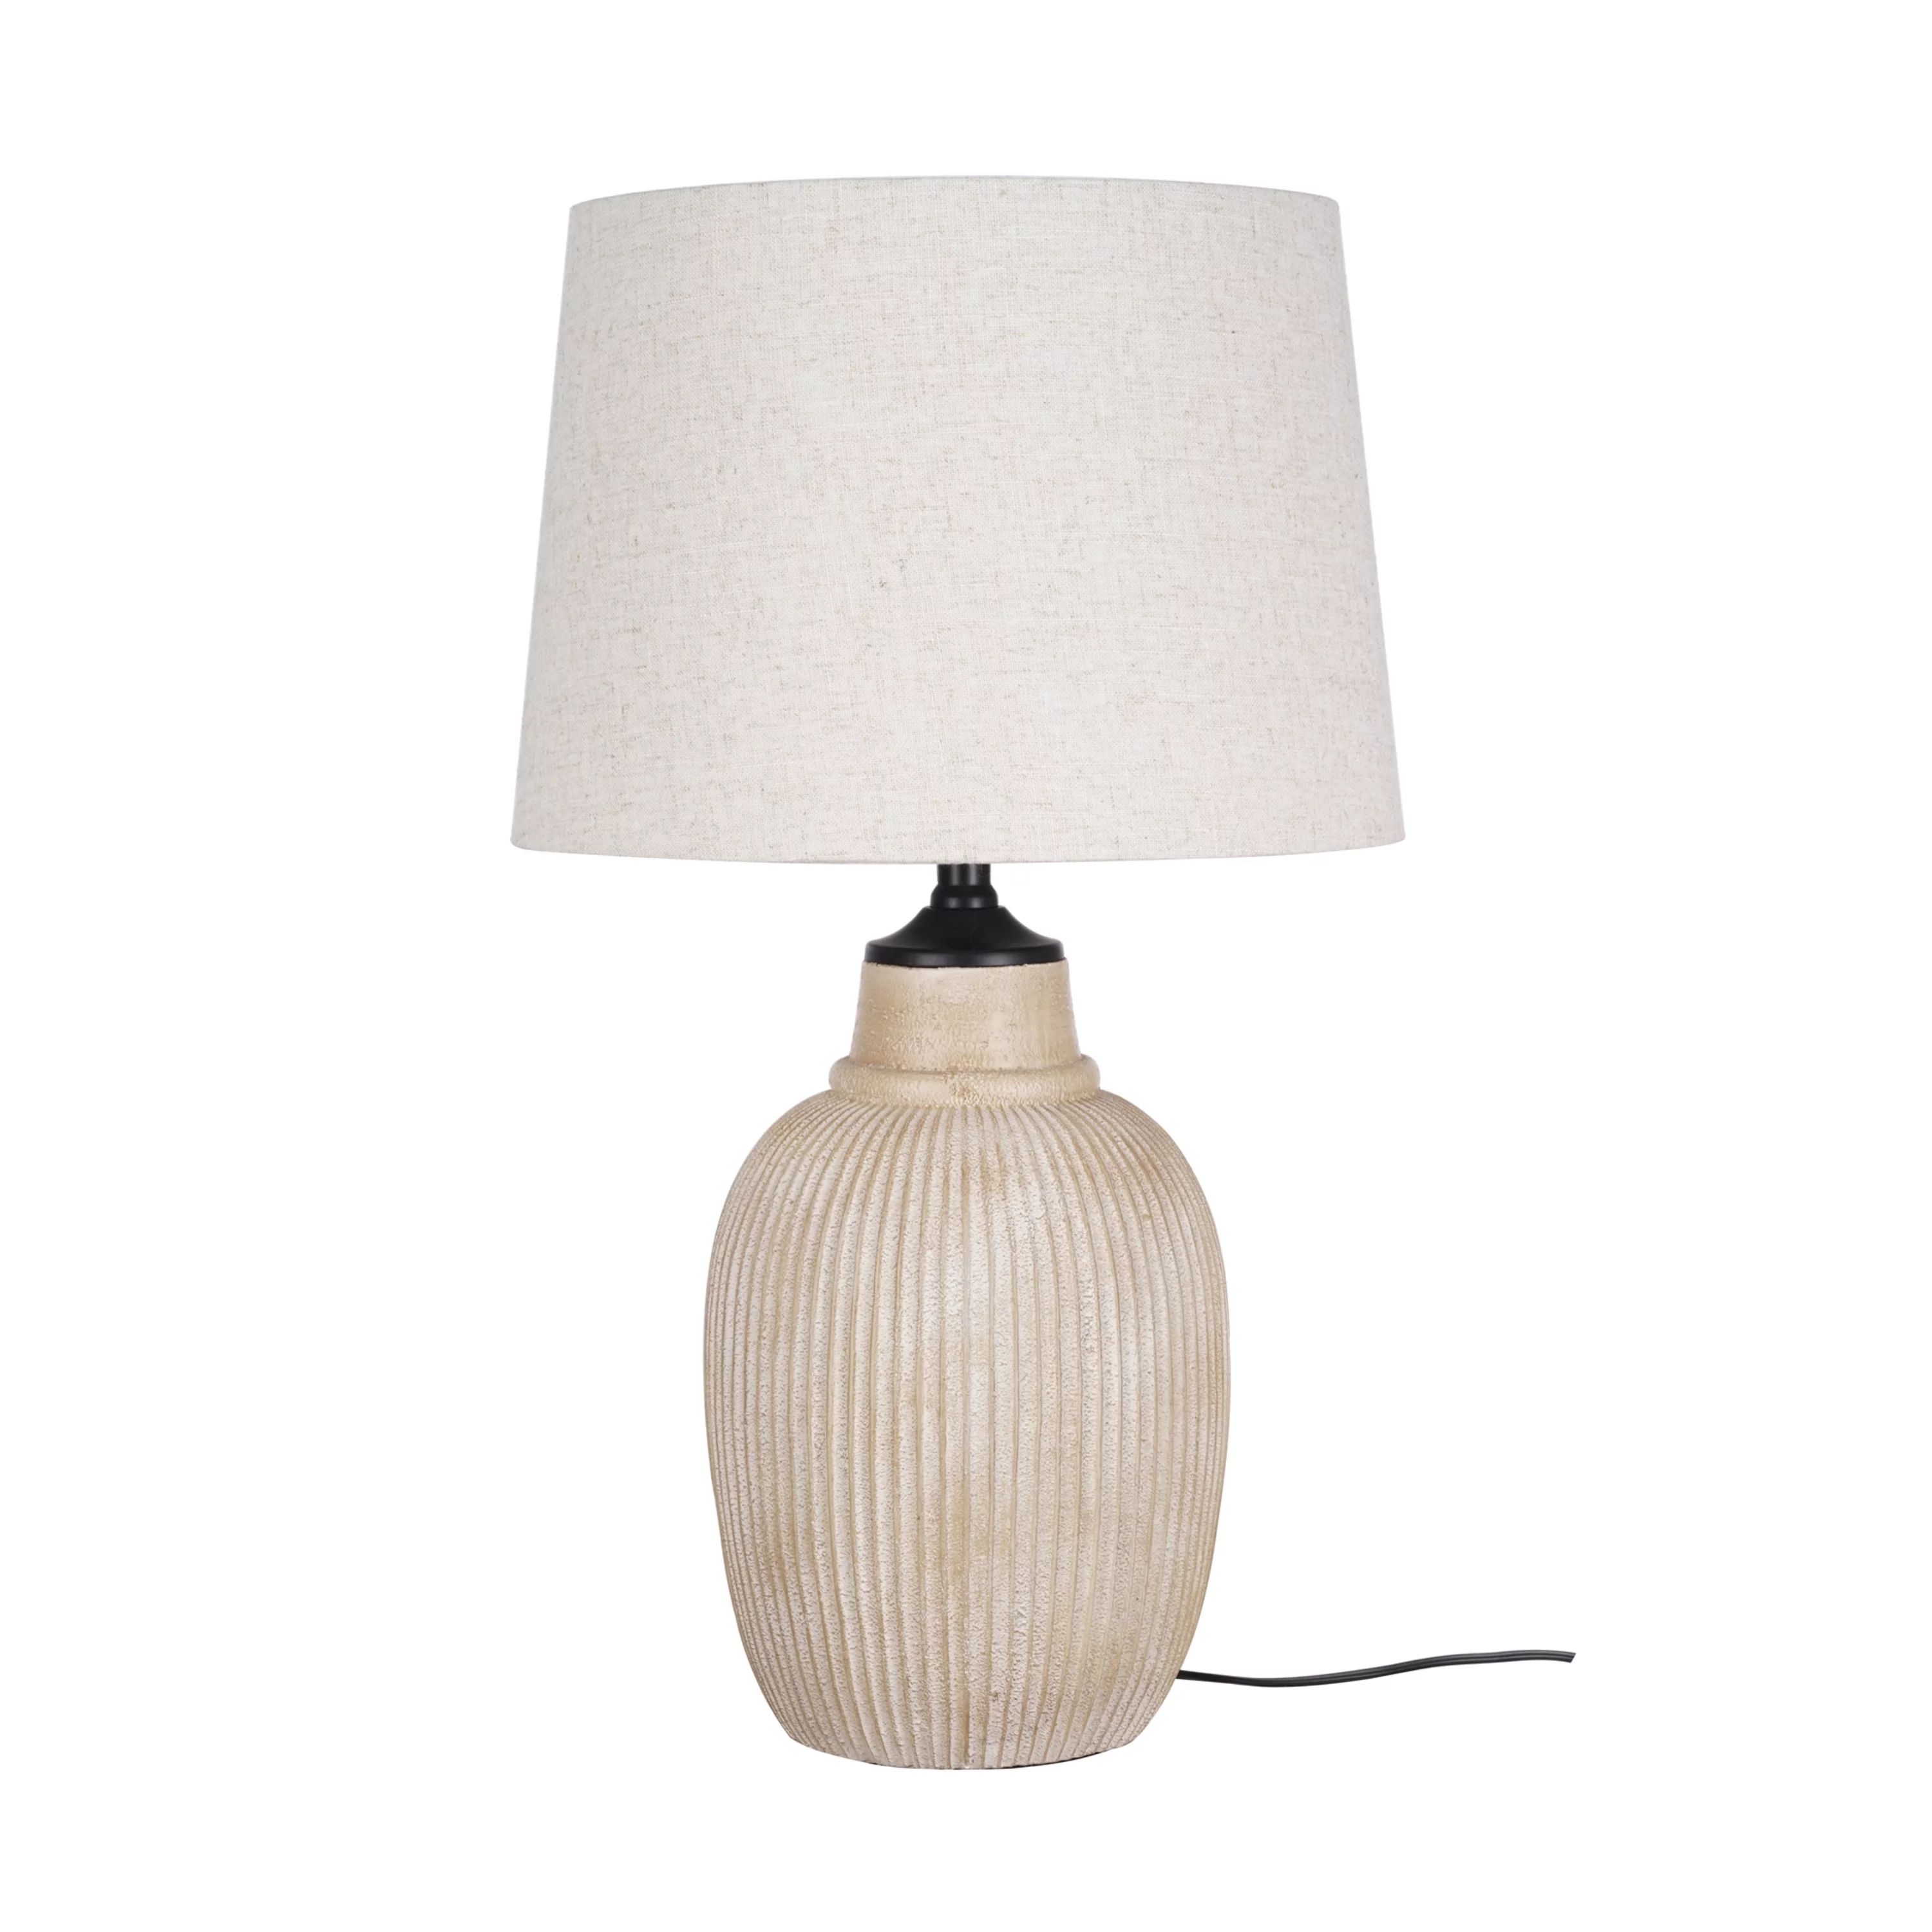 My Texas House 24.5"  Ribbed Table Lamp, Distressed Texture, Natural Finish, LED Bulb Included | Walmart (US)